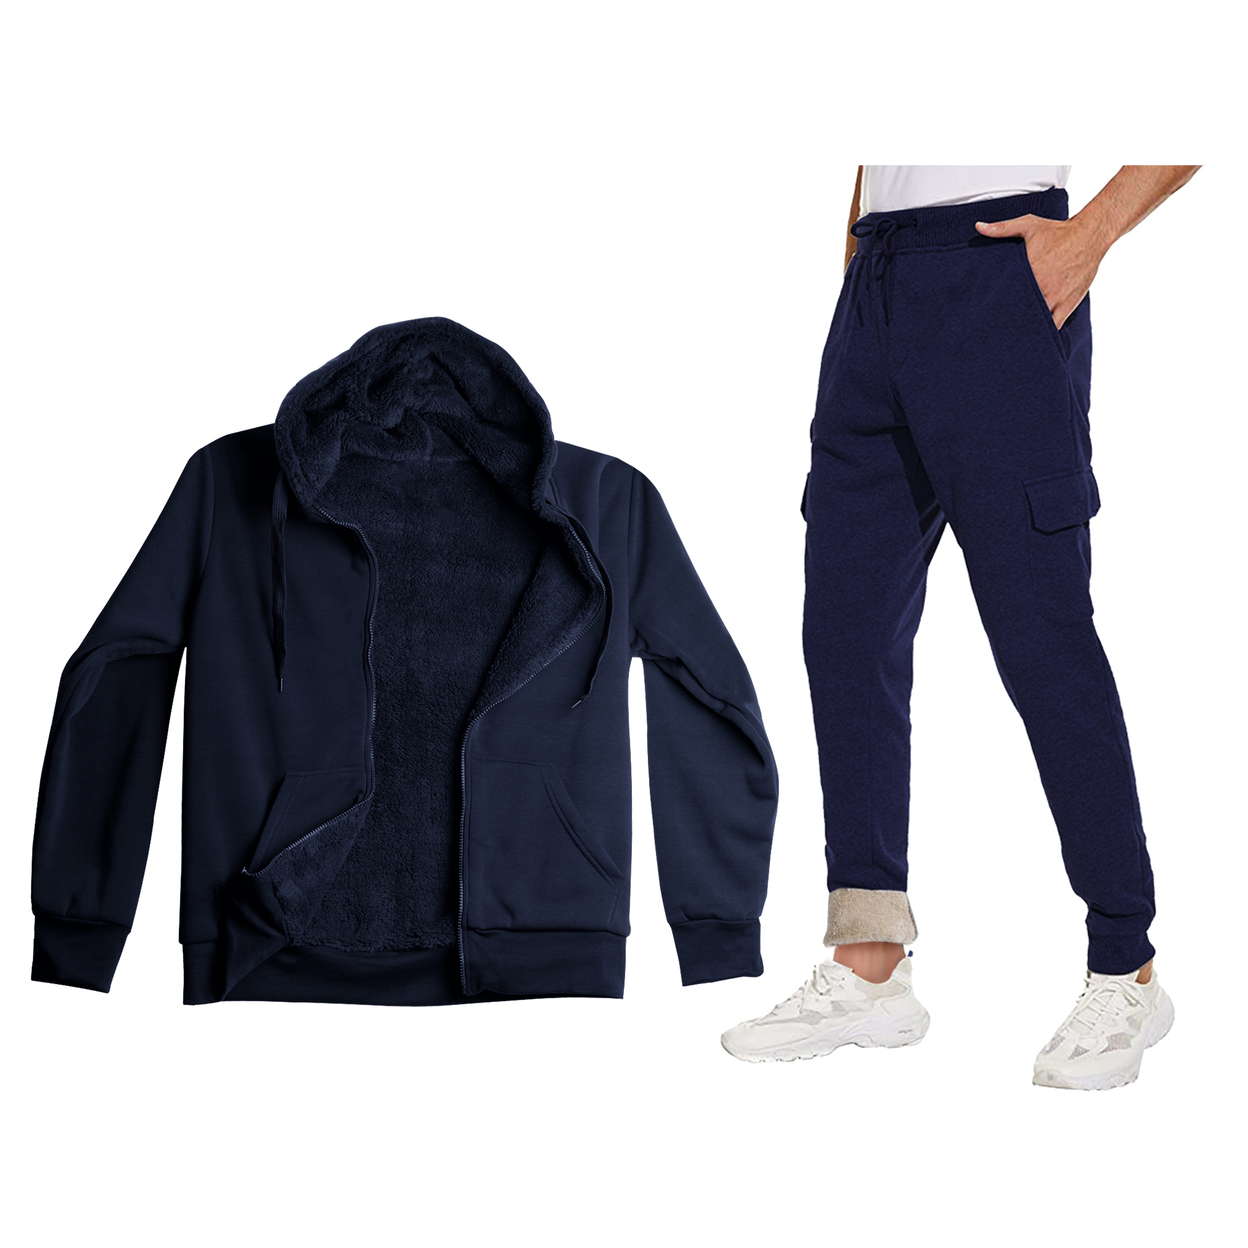 Men's Big & Tall Casual Super Soft Winter Warm Thick Sherpa Lined Sweatsuit Jogger Set - Navy, Large